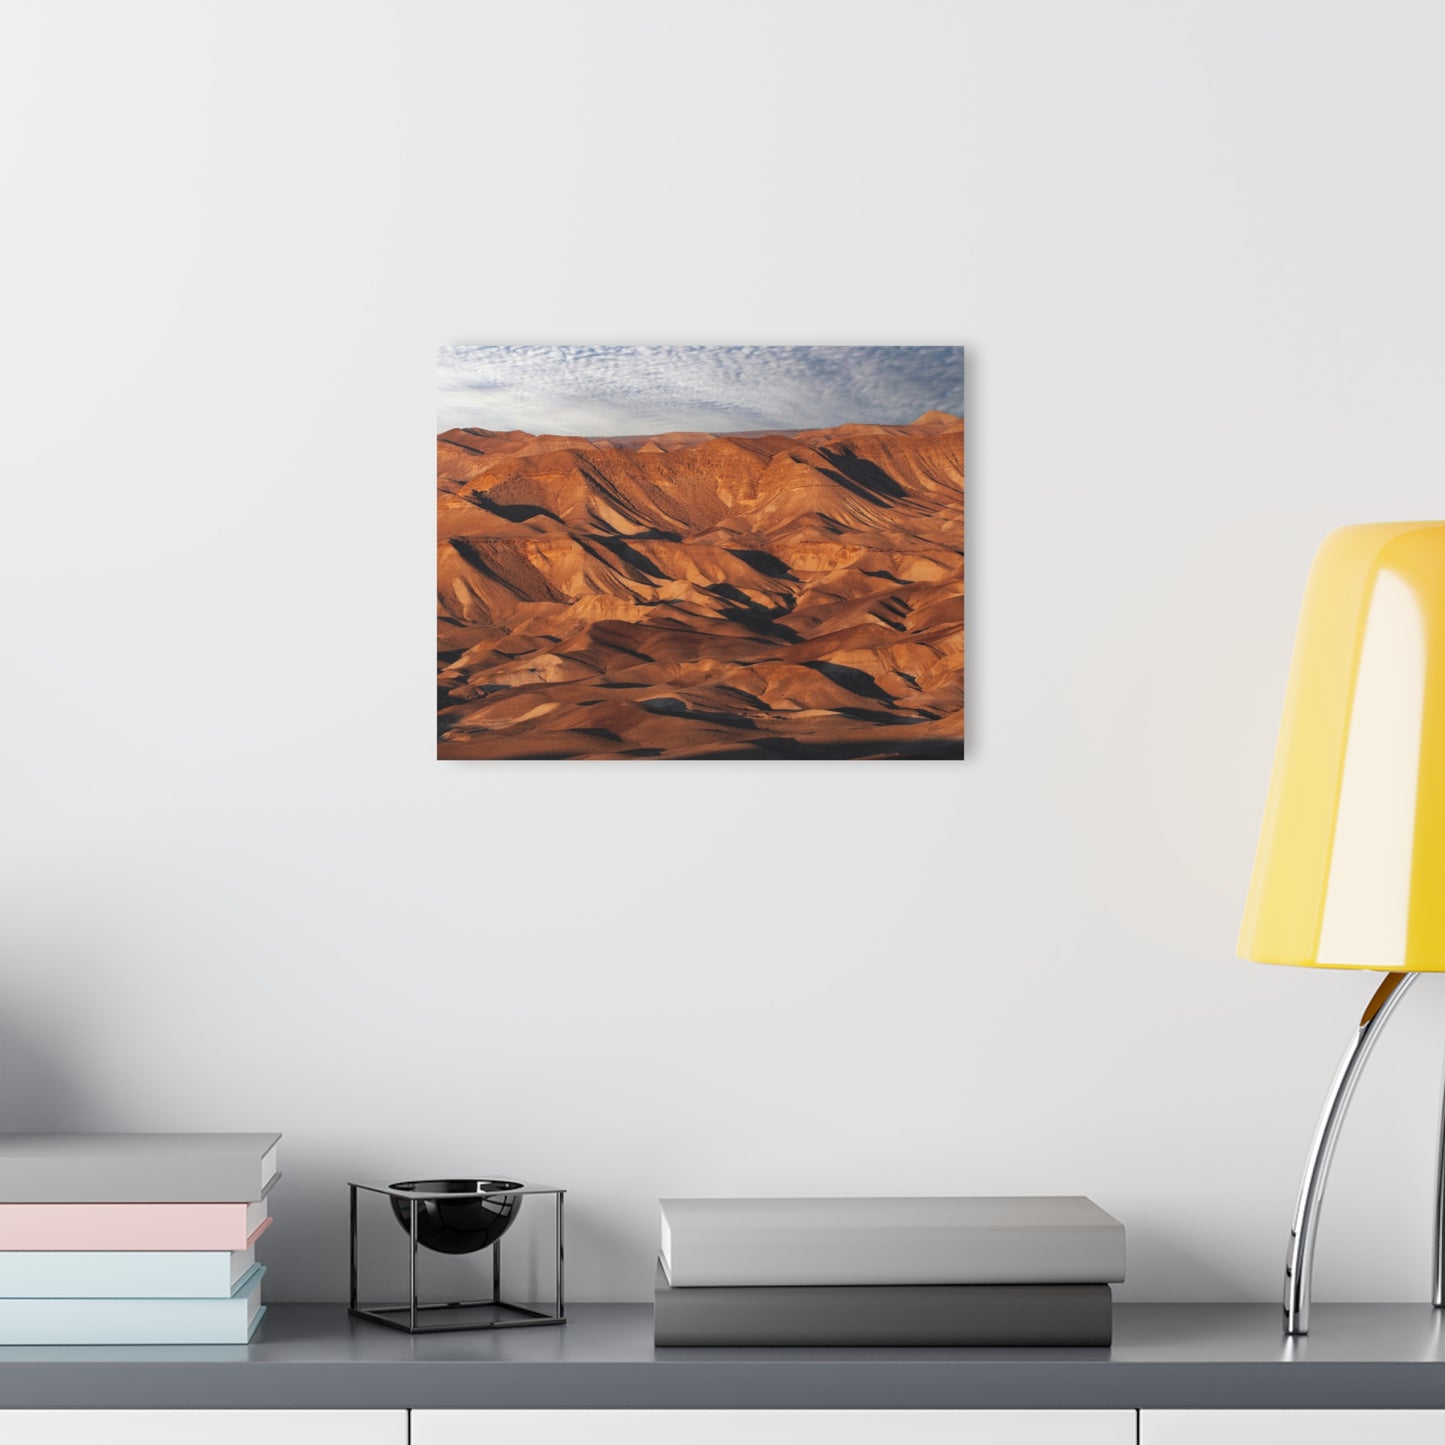 Judean Desert Sunrise by Yehoshua Halevi Photograph - Glossy Acrylic Print (French Cleat Hanging)